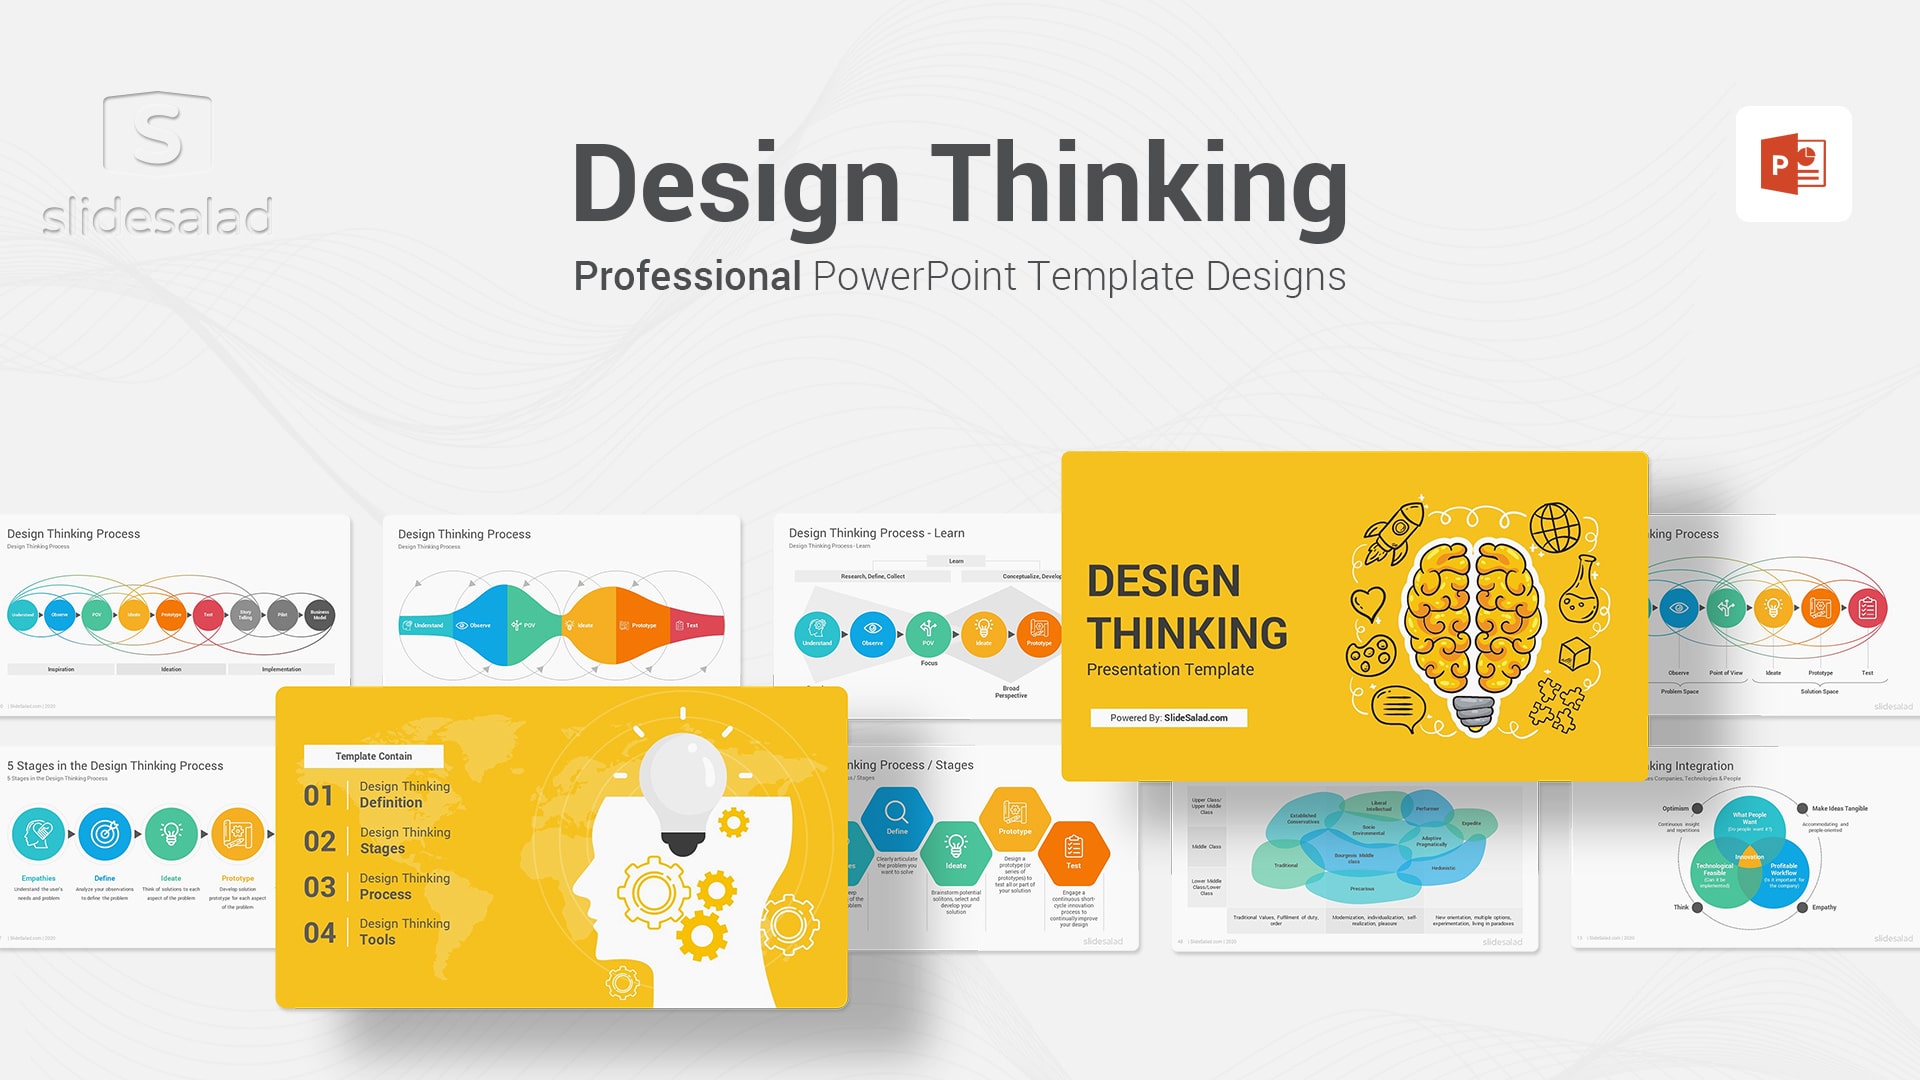 Design Thinking PowerPoint Templates - Innovative PPT Template to Discover How Design Thinking Helps Companies Become Creative